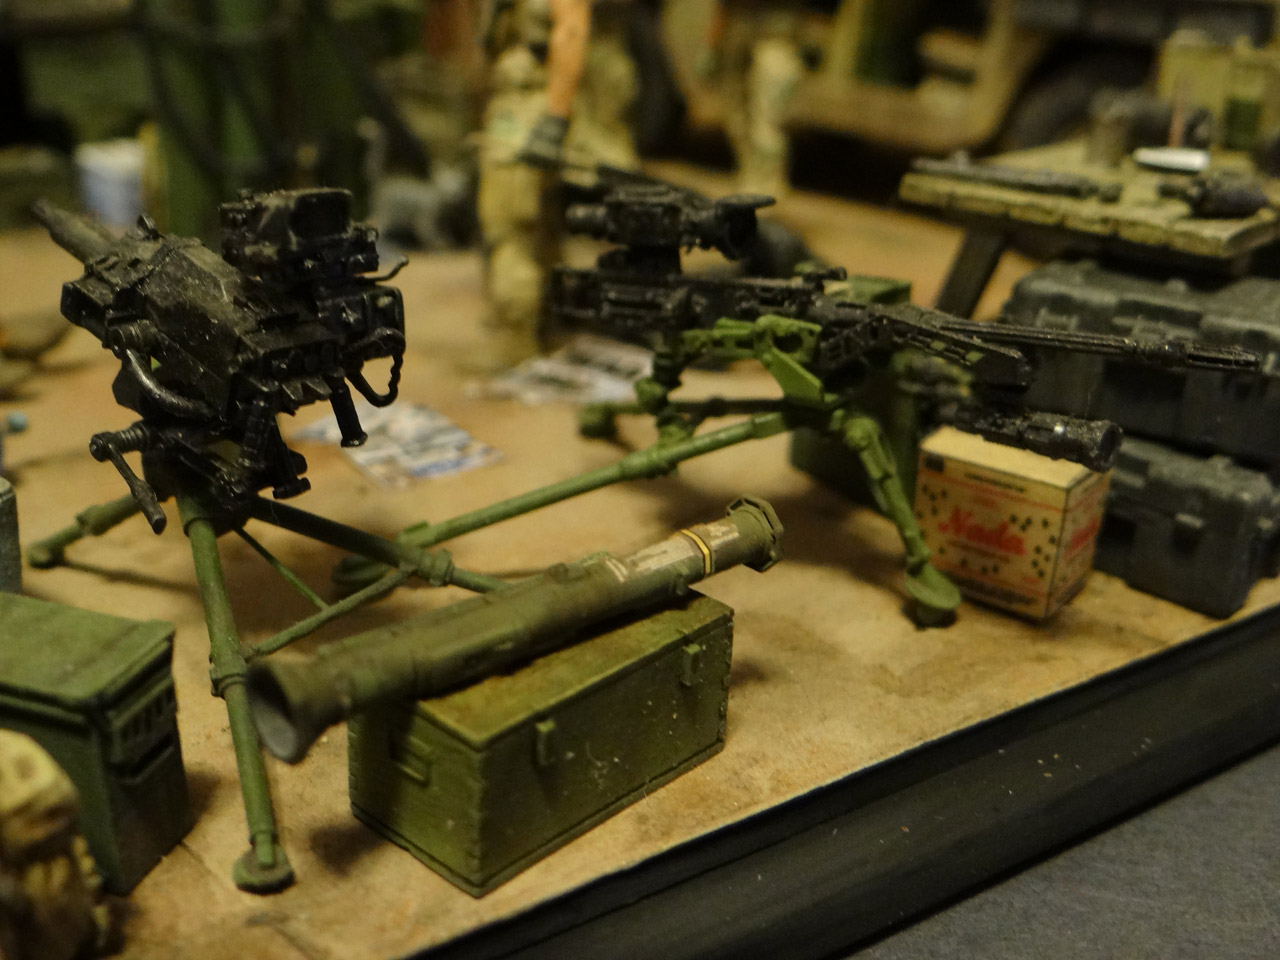 Dioramas and Vignettes: Enforcement to democracy, photo #21